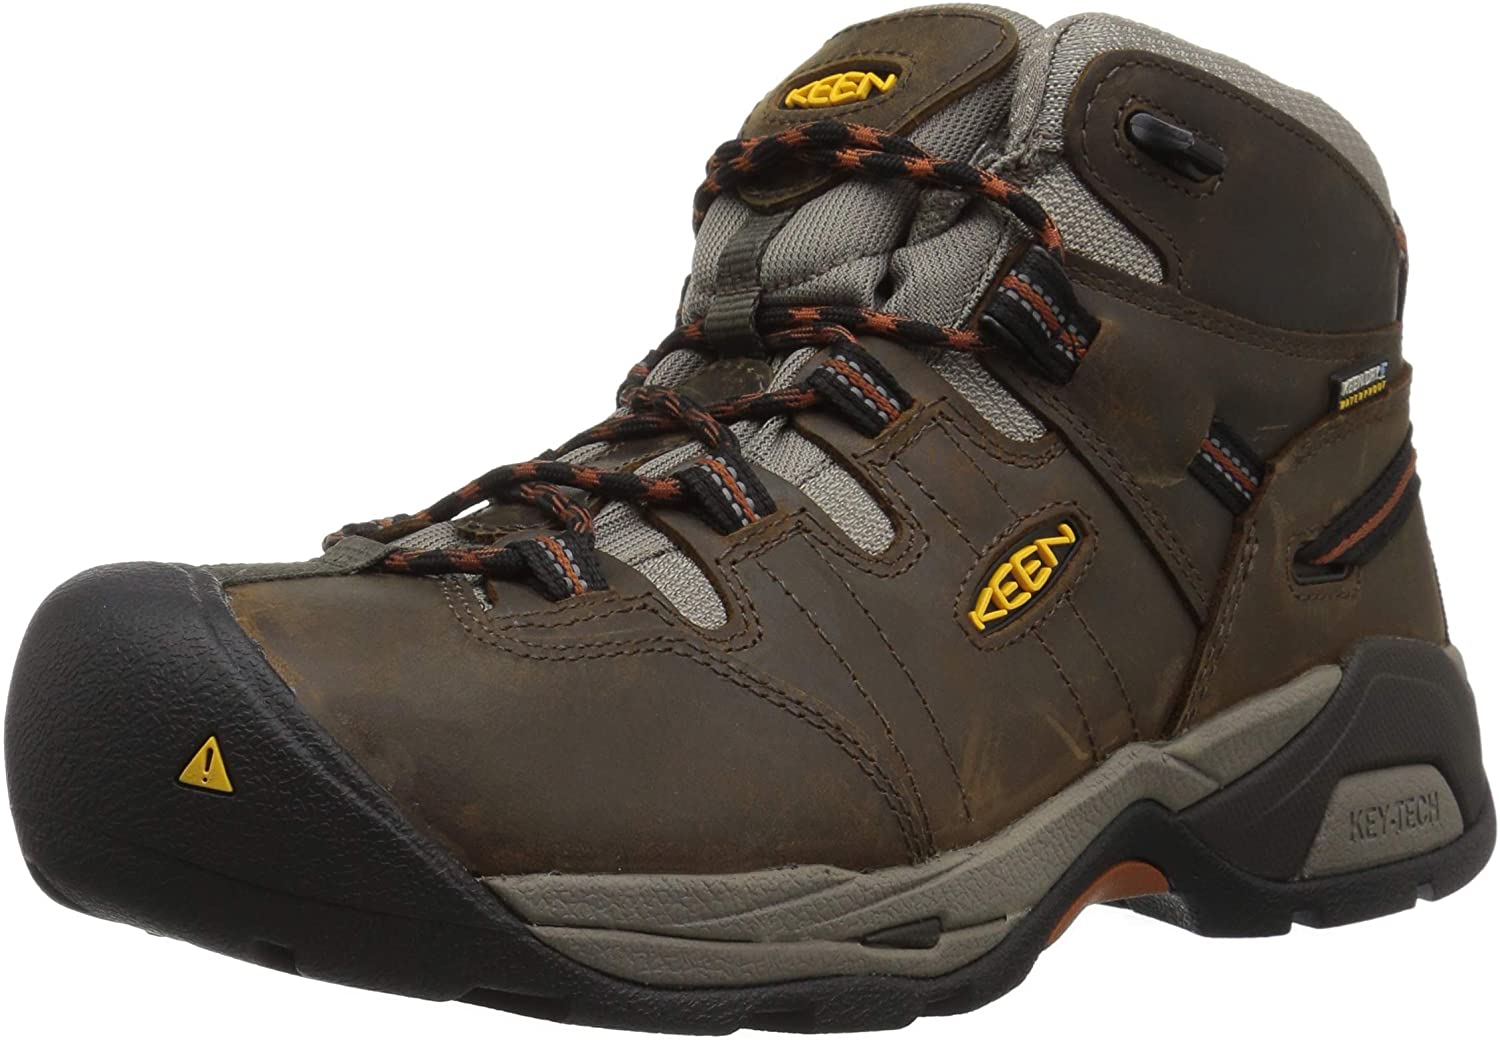 15 Most Comfortable Work Boots That Won't Hurt [Men And Women]